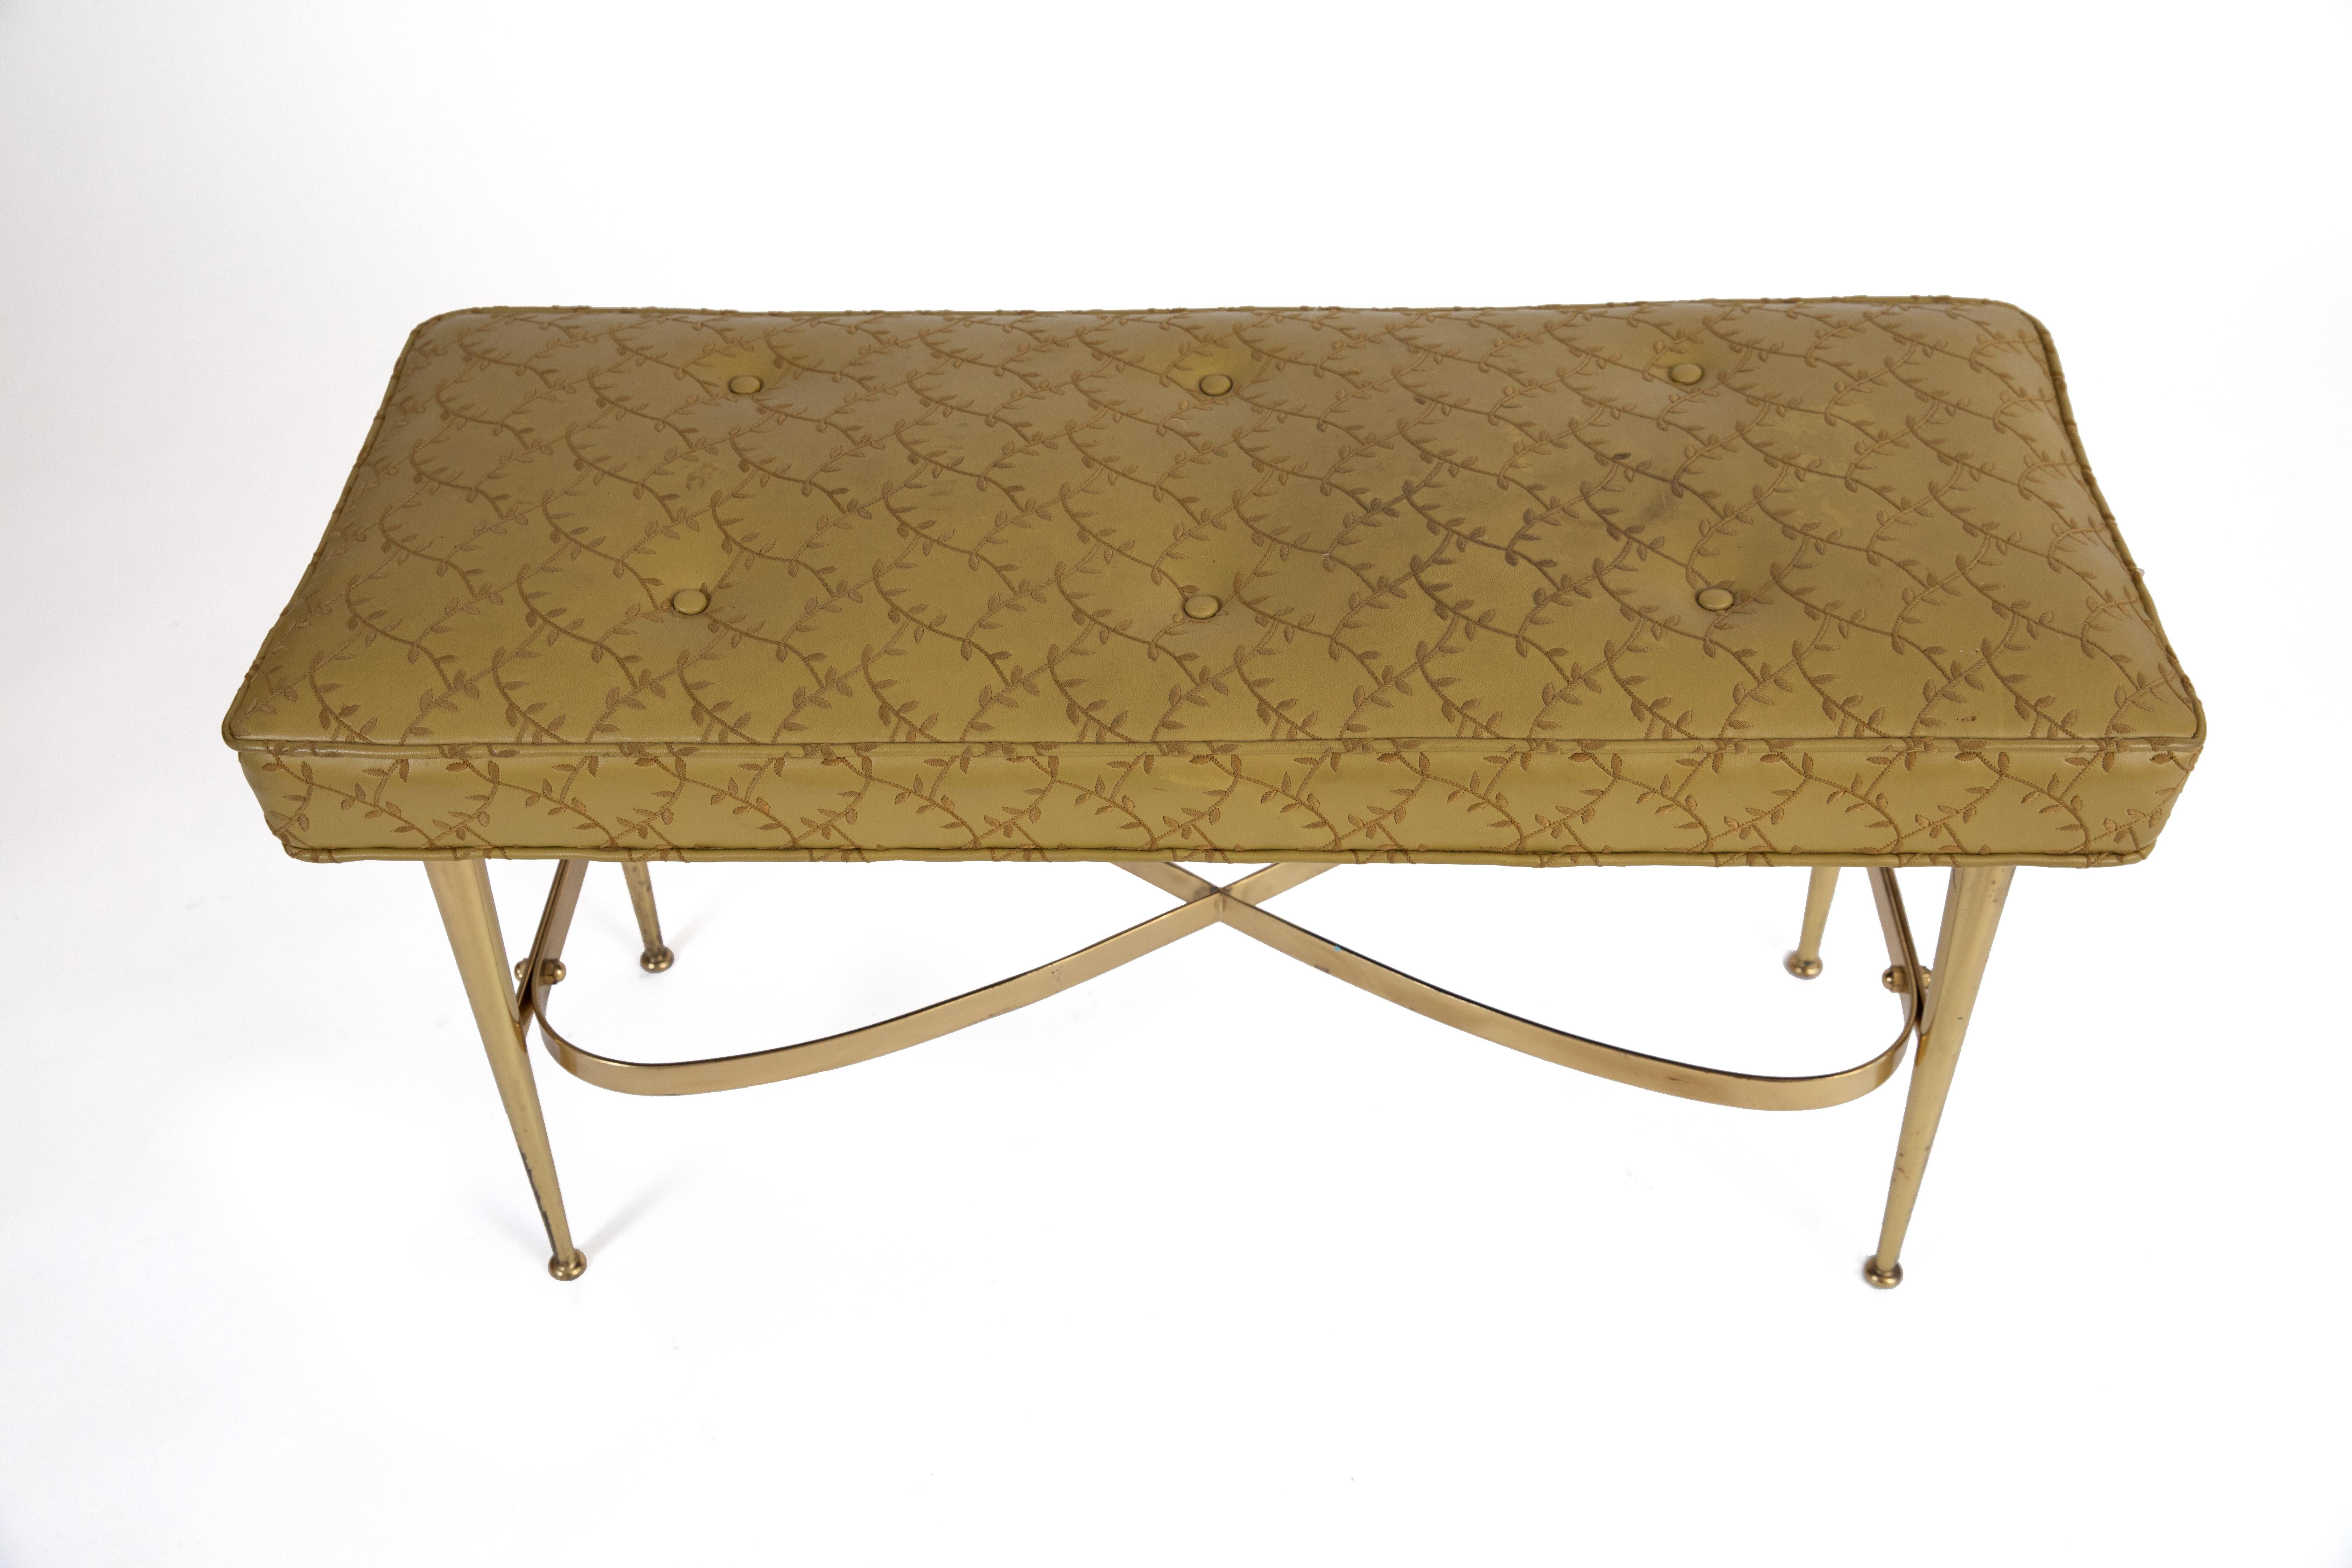 Brass and upholstered bench from Italy, circa early 1960s. This all original example has sinuous patinated brass legs and retains its original upholstery.
We can also upholster this in the leather or fabric of your choice.